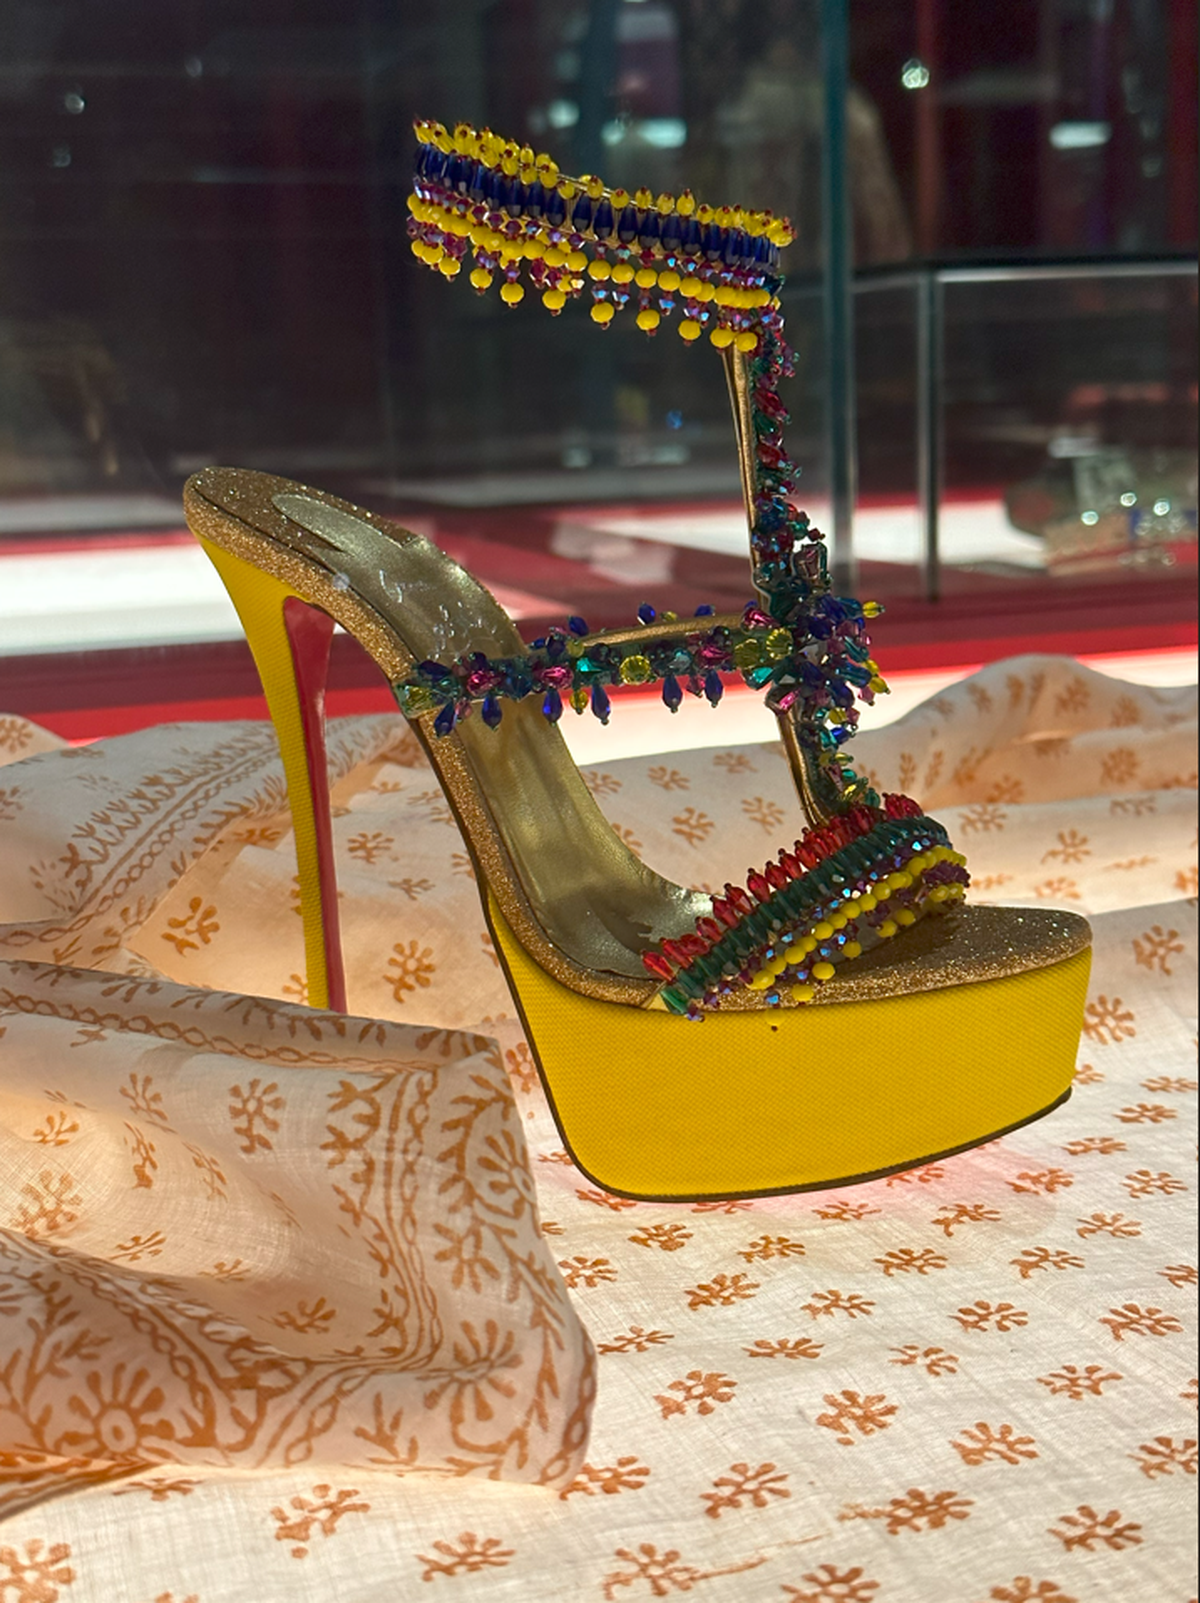 These ‘Devibroda Plato’ by Christian Louboutin are a fun reference to the infamous Princess Sita Devi of Baroda who rubbed shoulders with the crème-de-la-crème of European society and was known for her extravagant jewels and lifestyle.